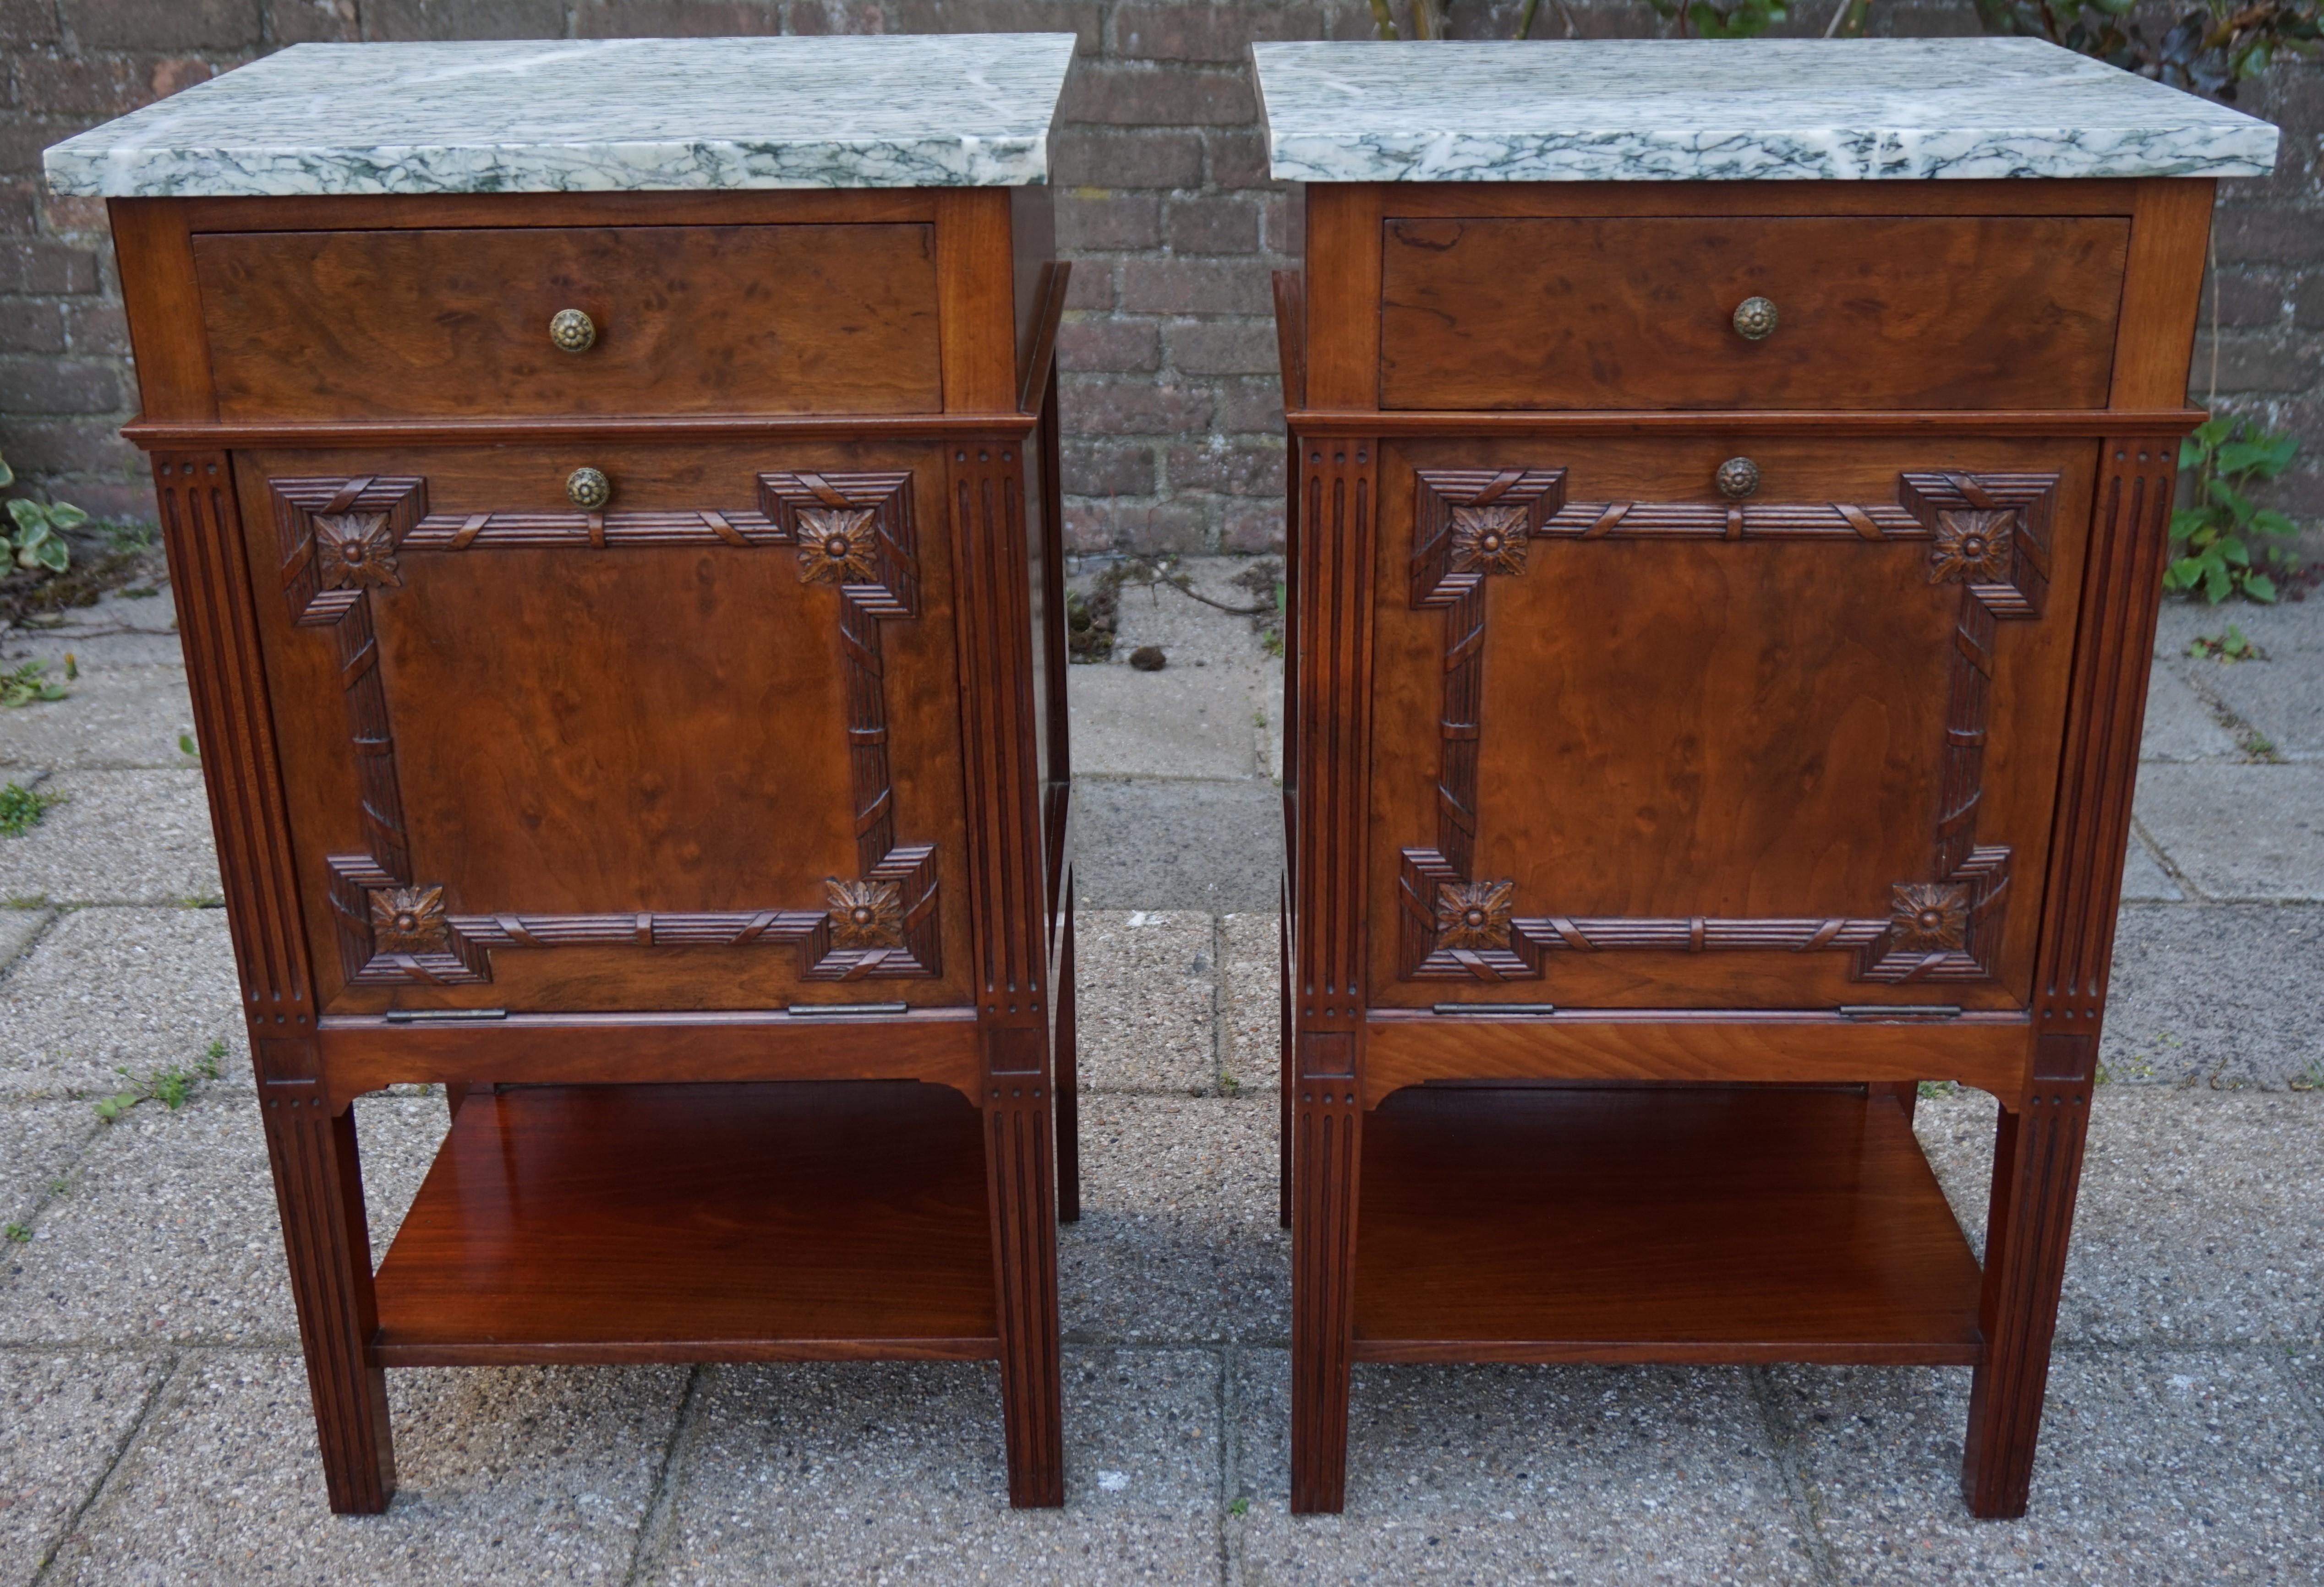 Stunning pair of early 20th century, handcrafted, solid mahogany bedside cabinets.

If you have an eye for detail, good shapes and top of the line furniture than you know how hard it is to find anything half decent in furniture stores of today.